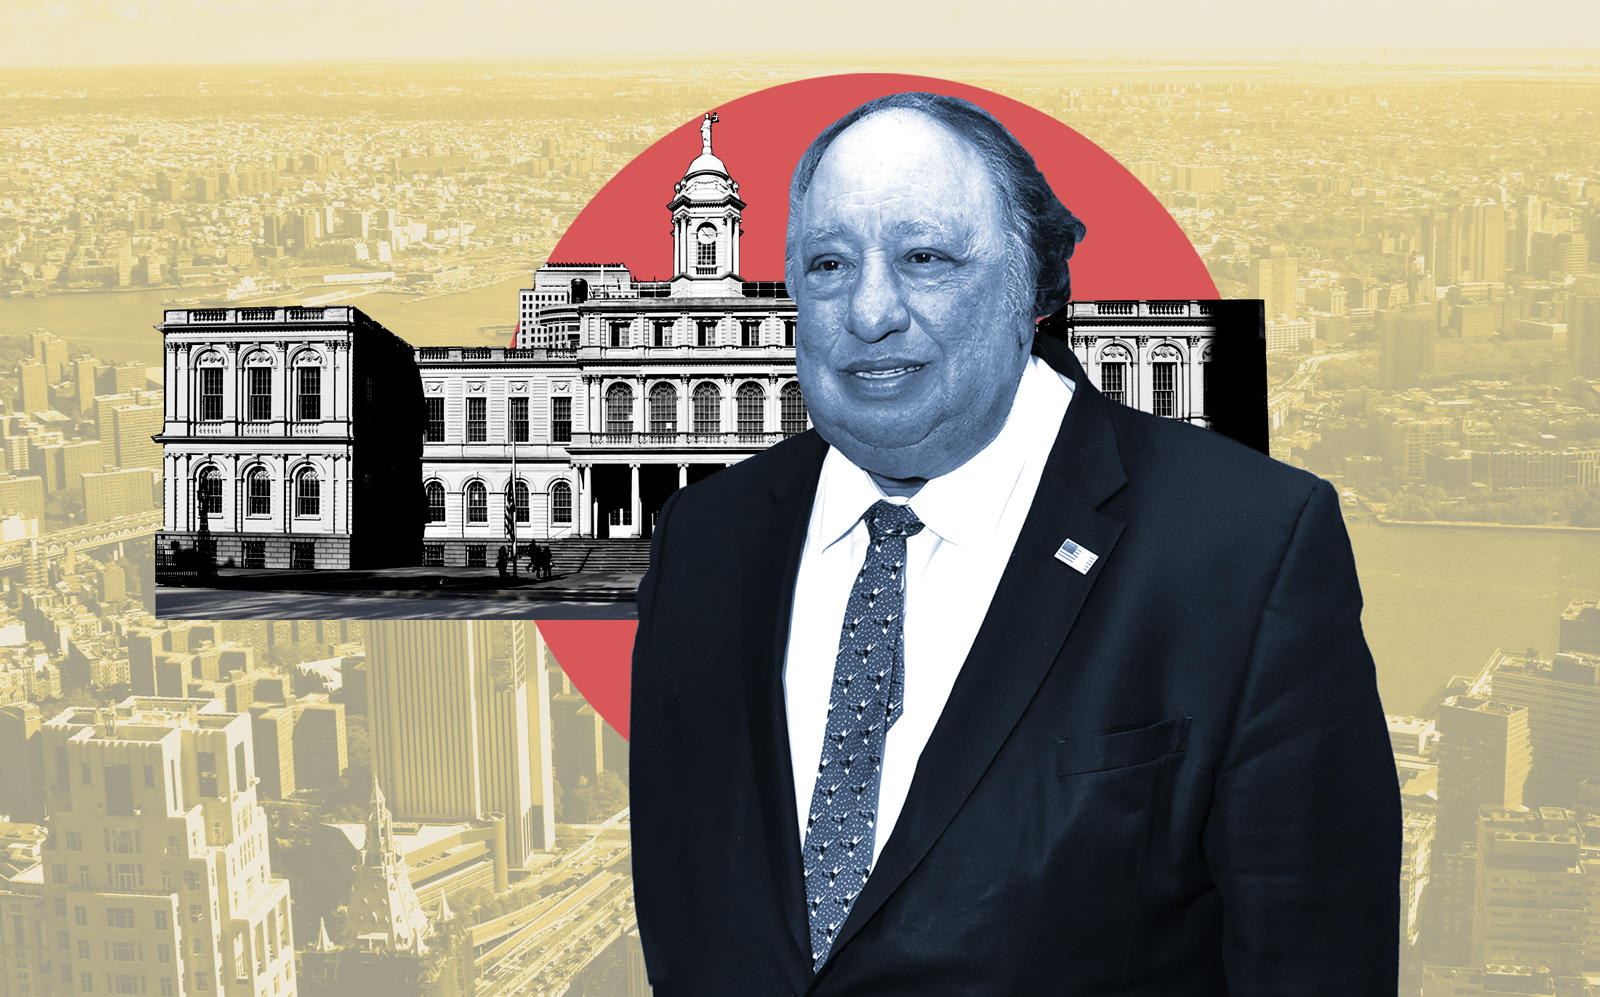 Billionaire grocer and developer John Catsimatidis is exploring a bid for the 2021 mayoral race. (Getty, iStock)